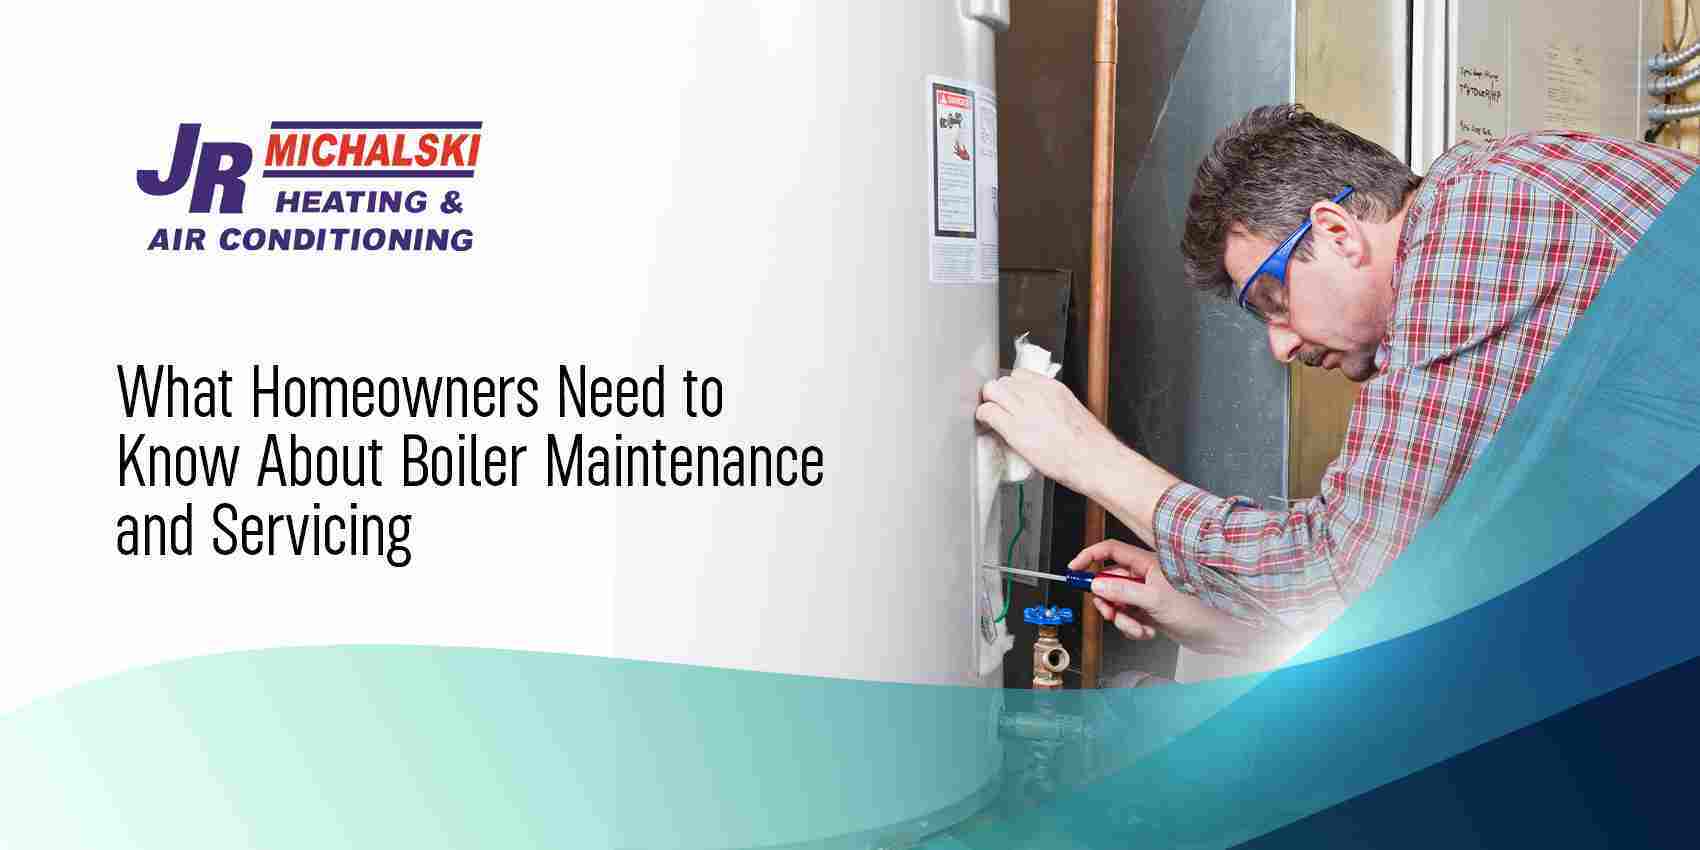 What Homeowners Need to Know About Boiler Maintenance and Servicing